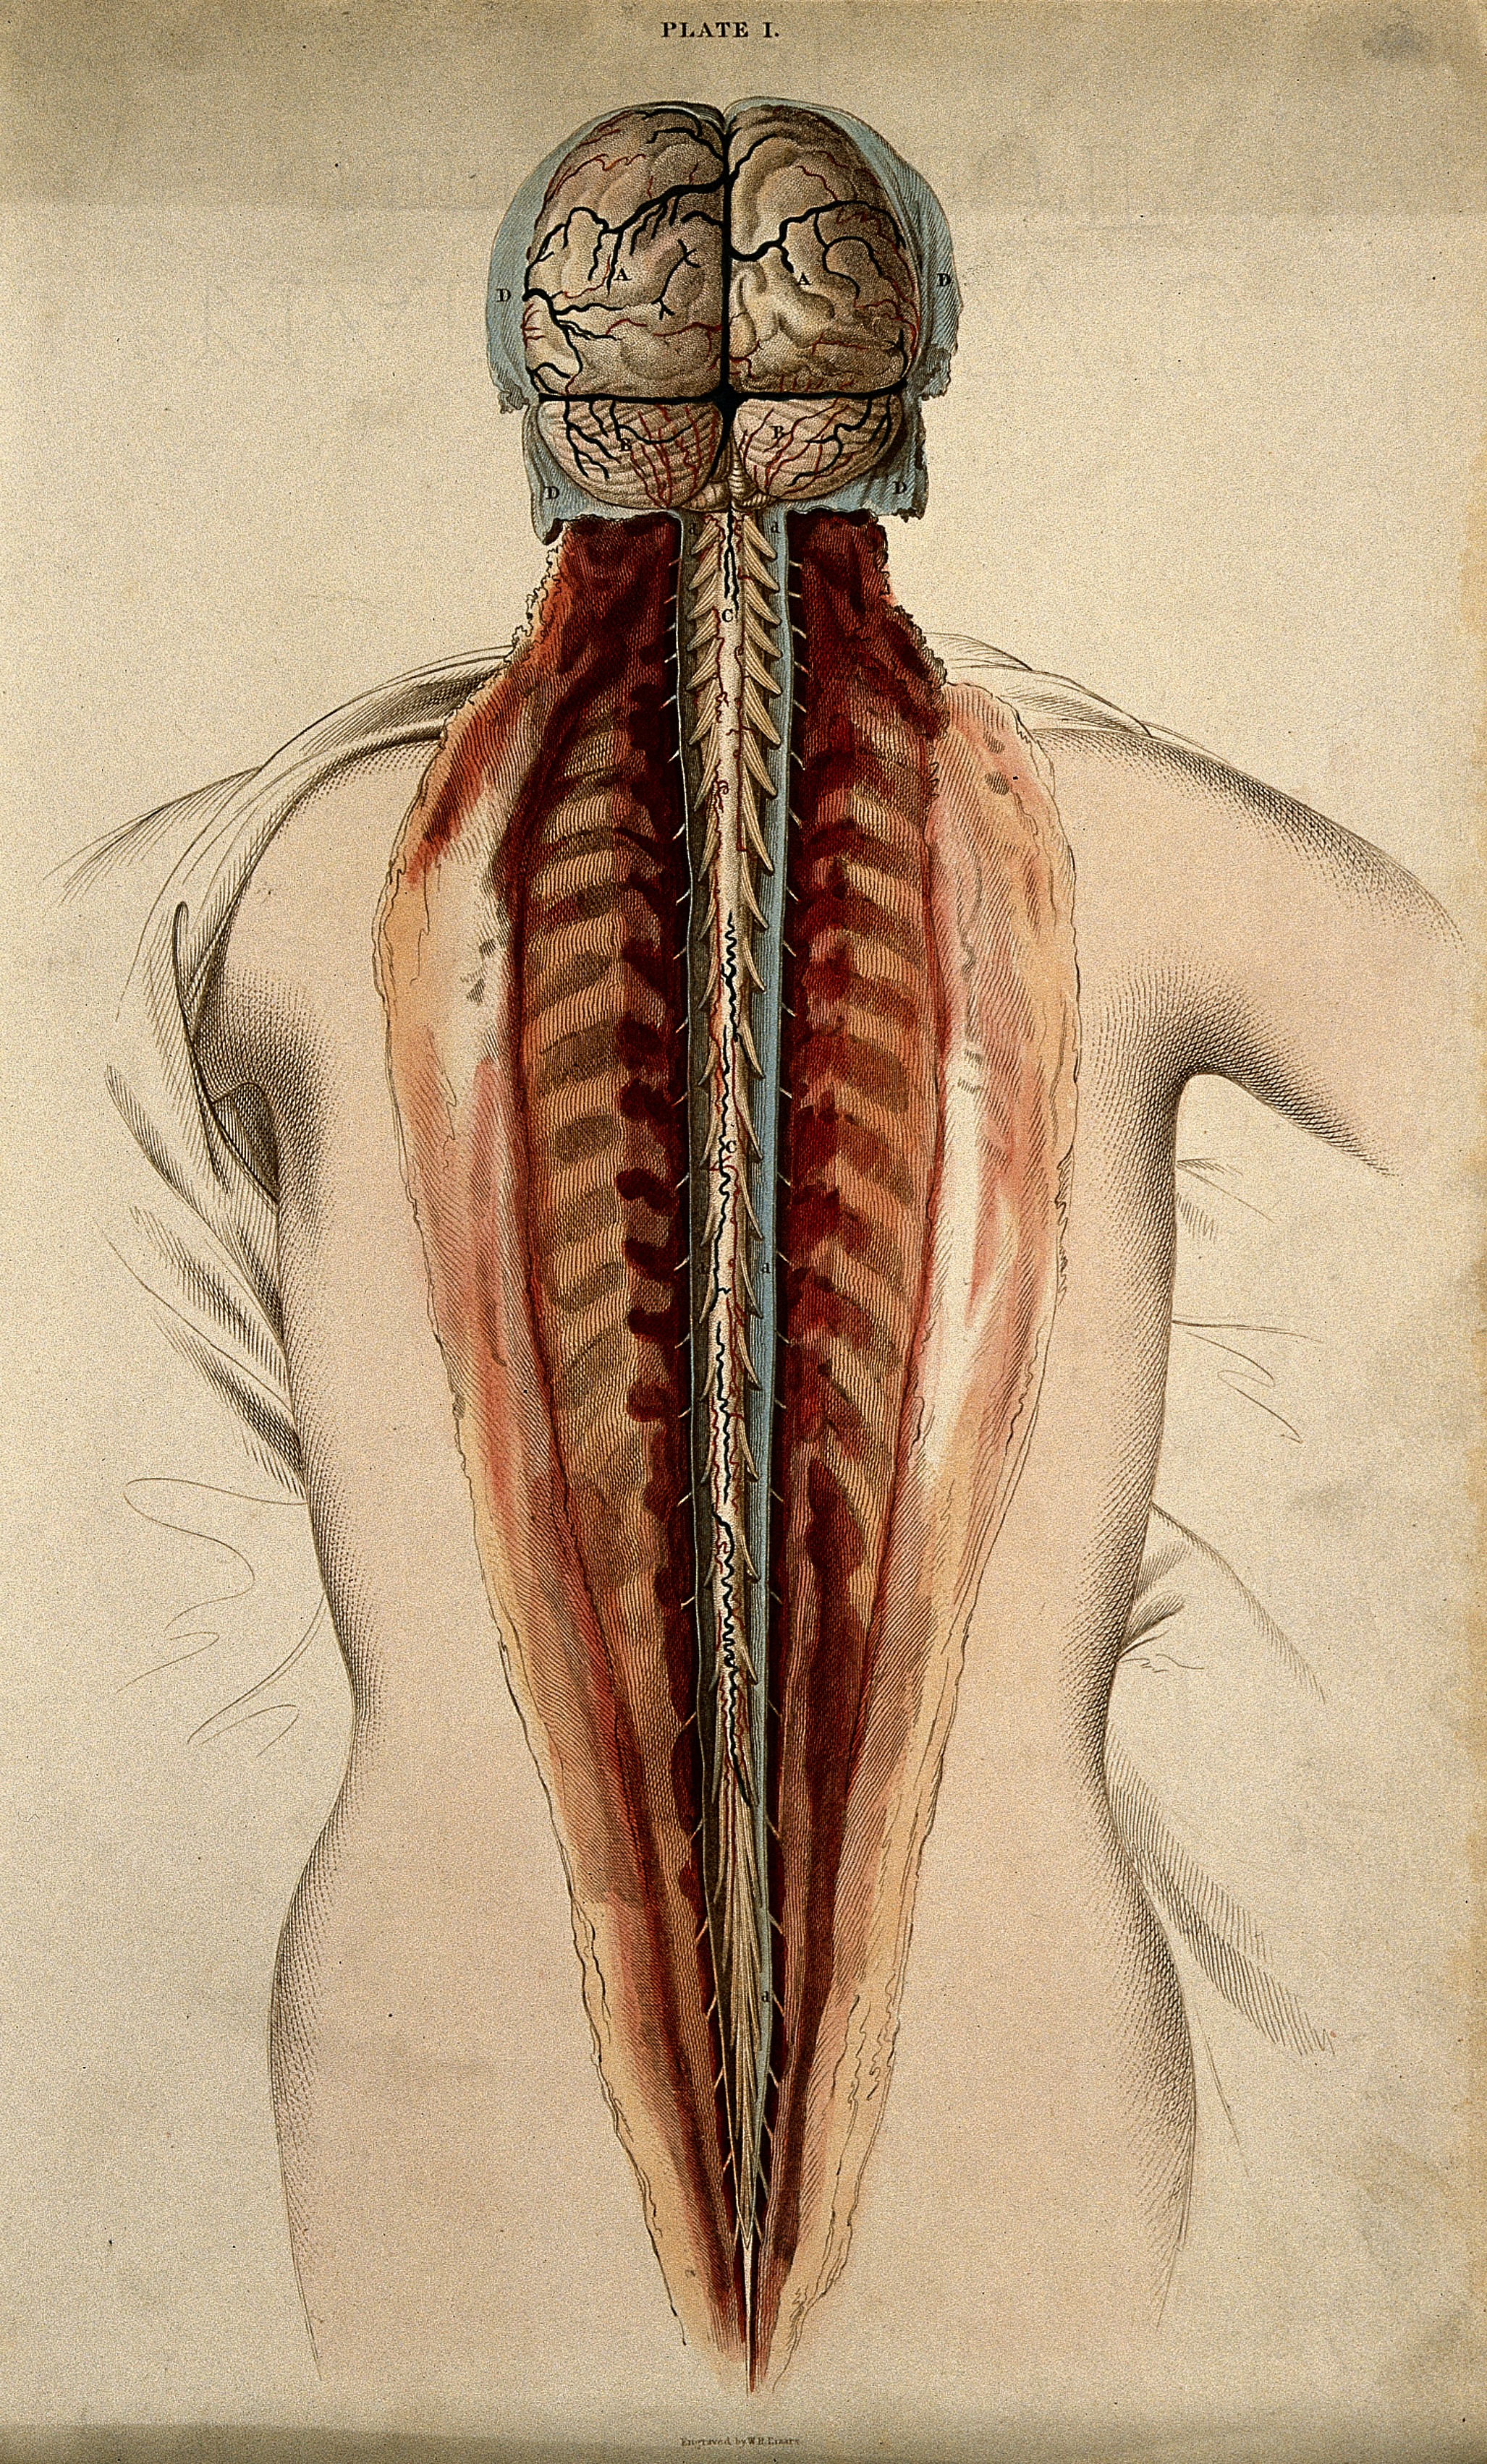 Drawing in colored lines of a cadaver dissection showing the posterior brain and spinal cord